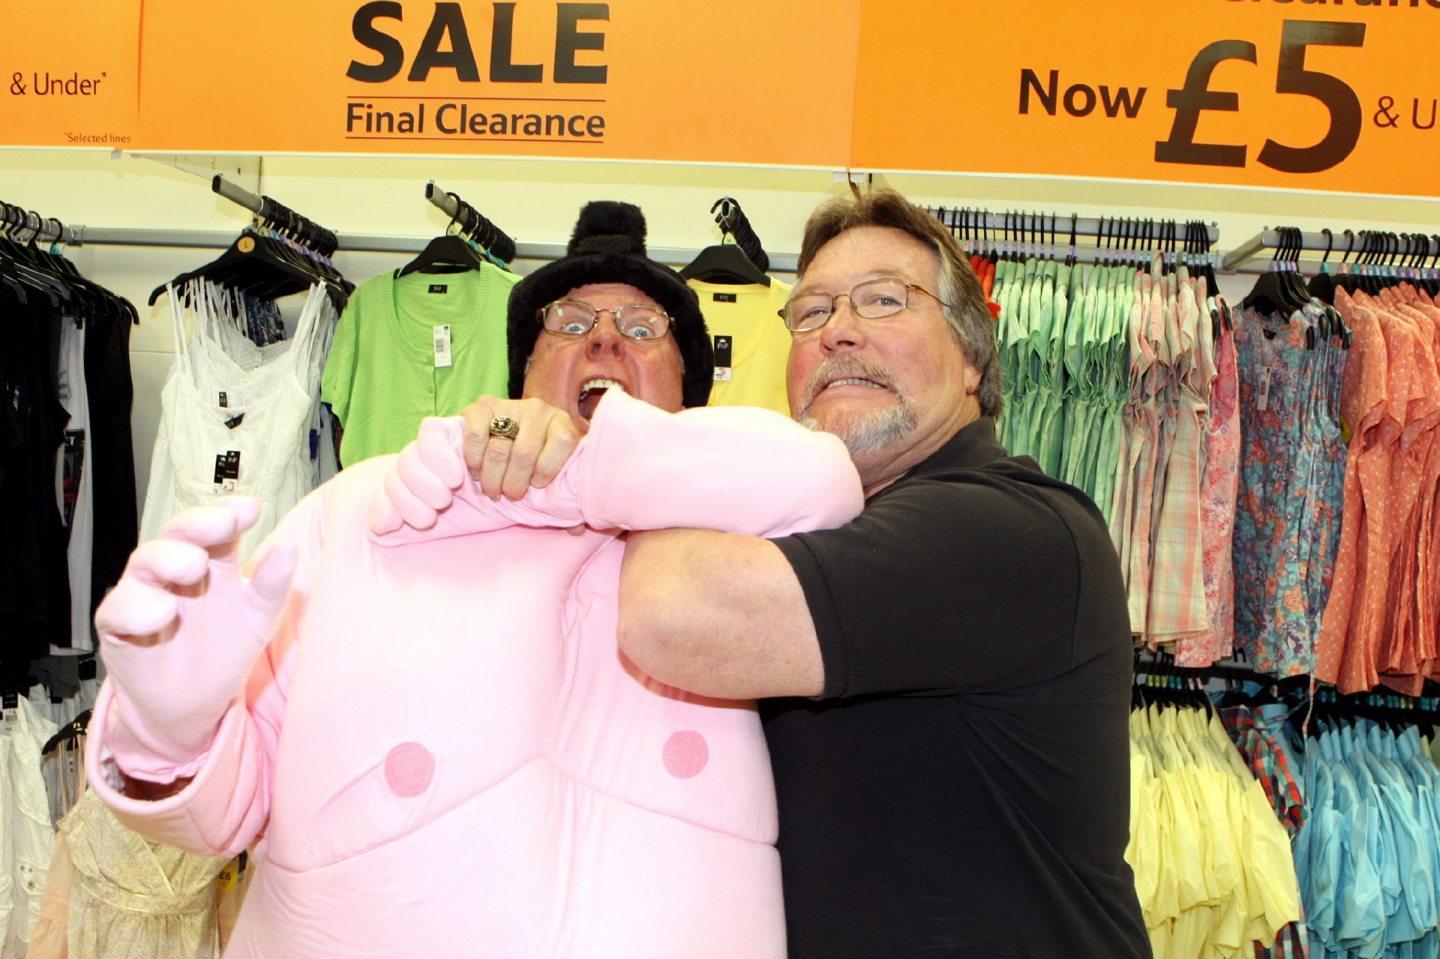 Ted DiBiase gets the better of the Tele's 'Hulk Shogun' in the Tesco Kingsway aisle in 2010.